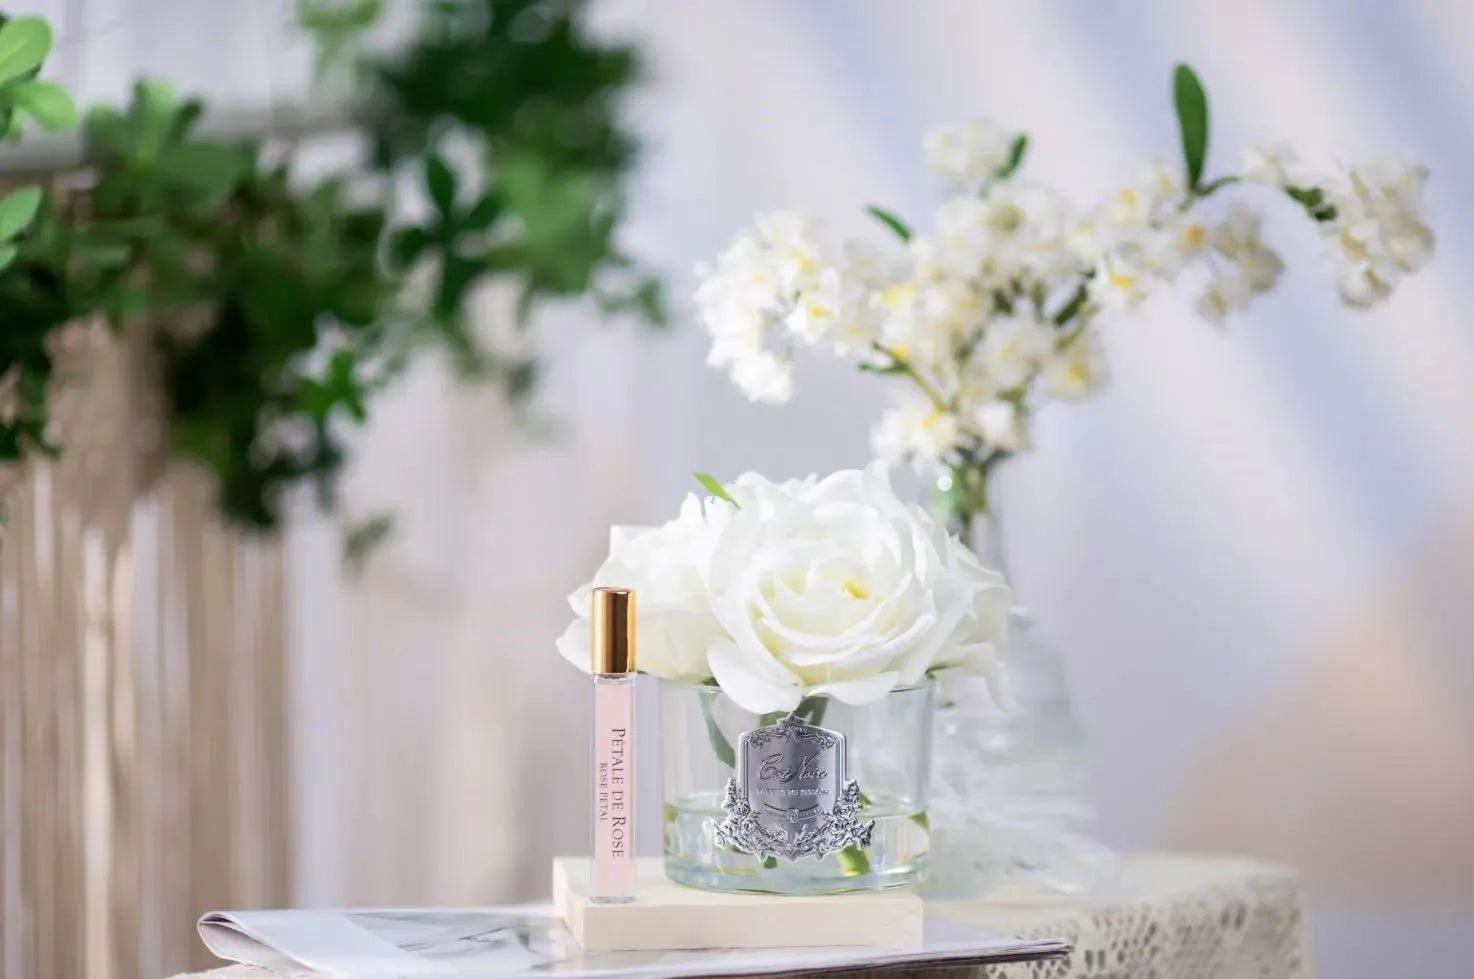 The image depicts a serene and graceful product presentation set on a marble table. In the foreground, a clear glass vase holds a large white rose, and beside it is a sleek perfume roller with a clear body and gold cap, labeled "Petale De Rose." In the background, a small glass vase with delicate white flowers adds to the floral theme.